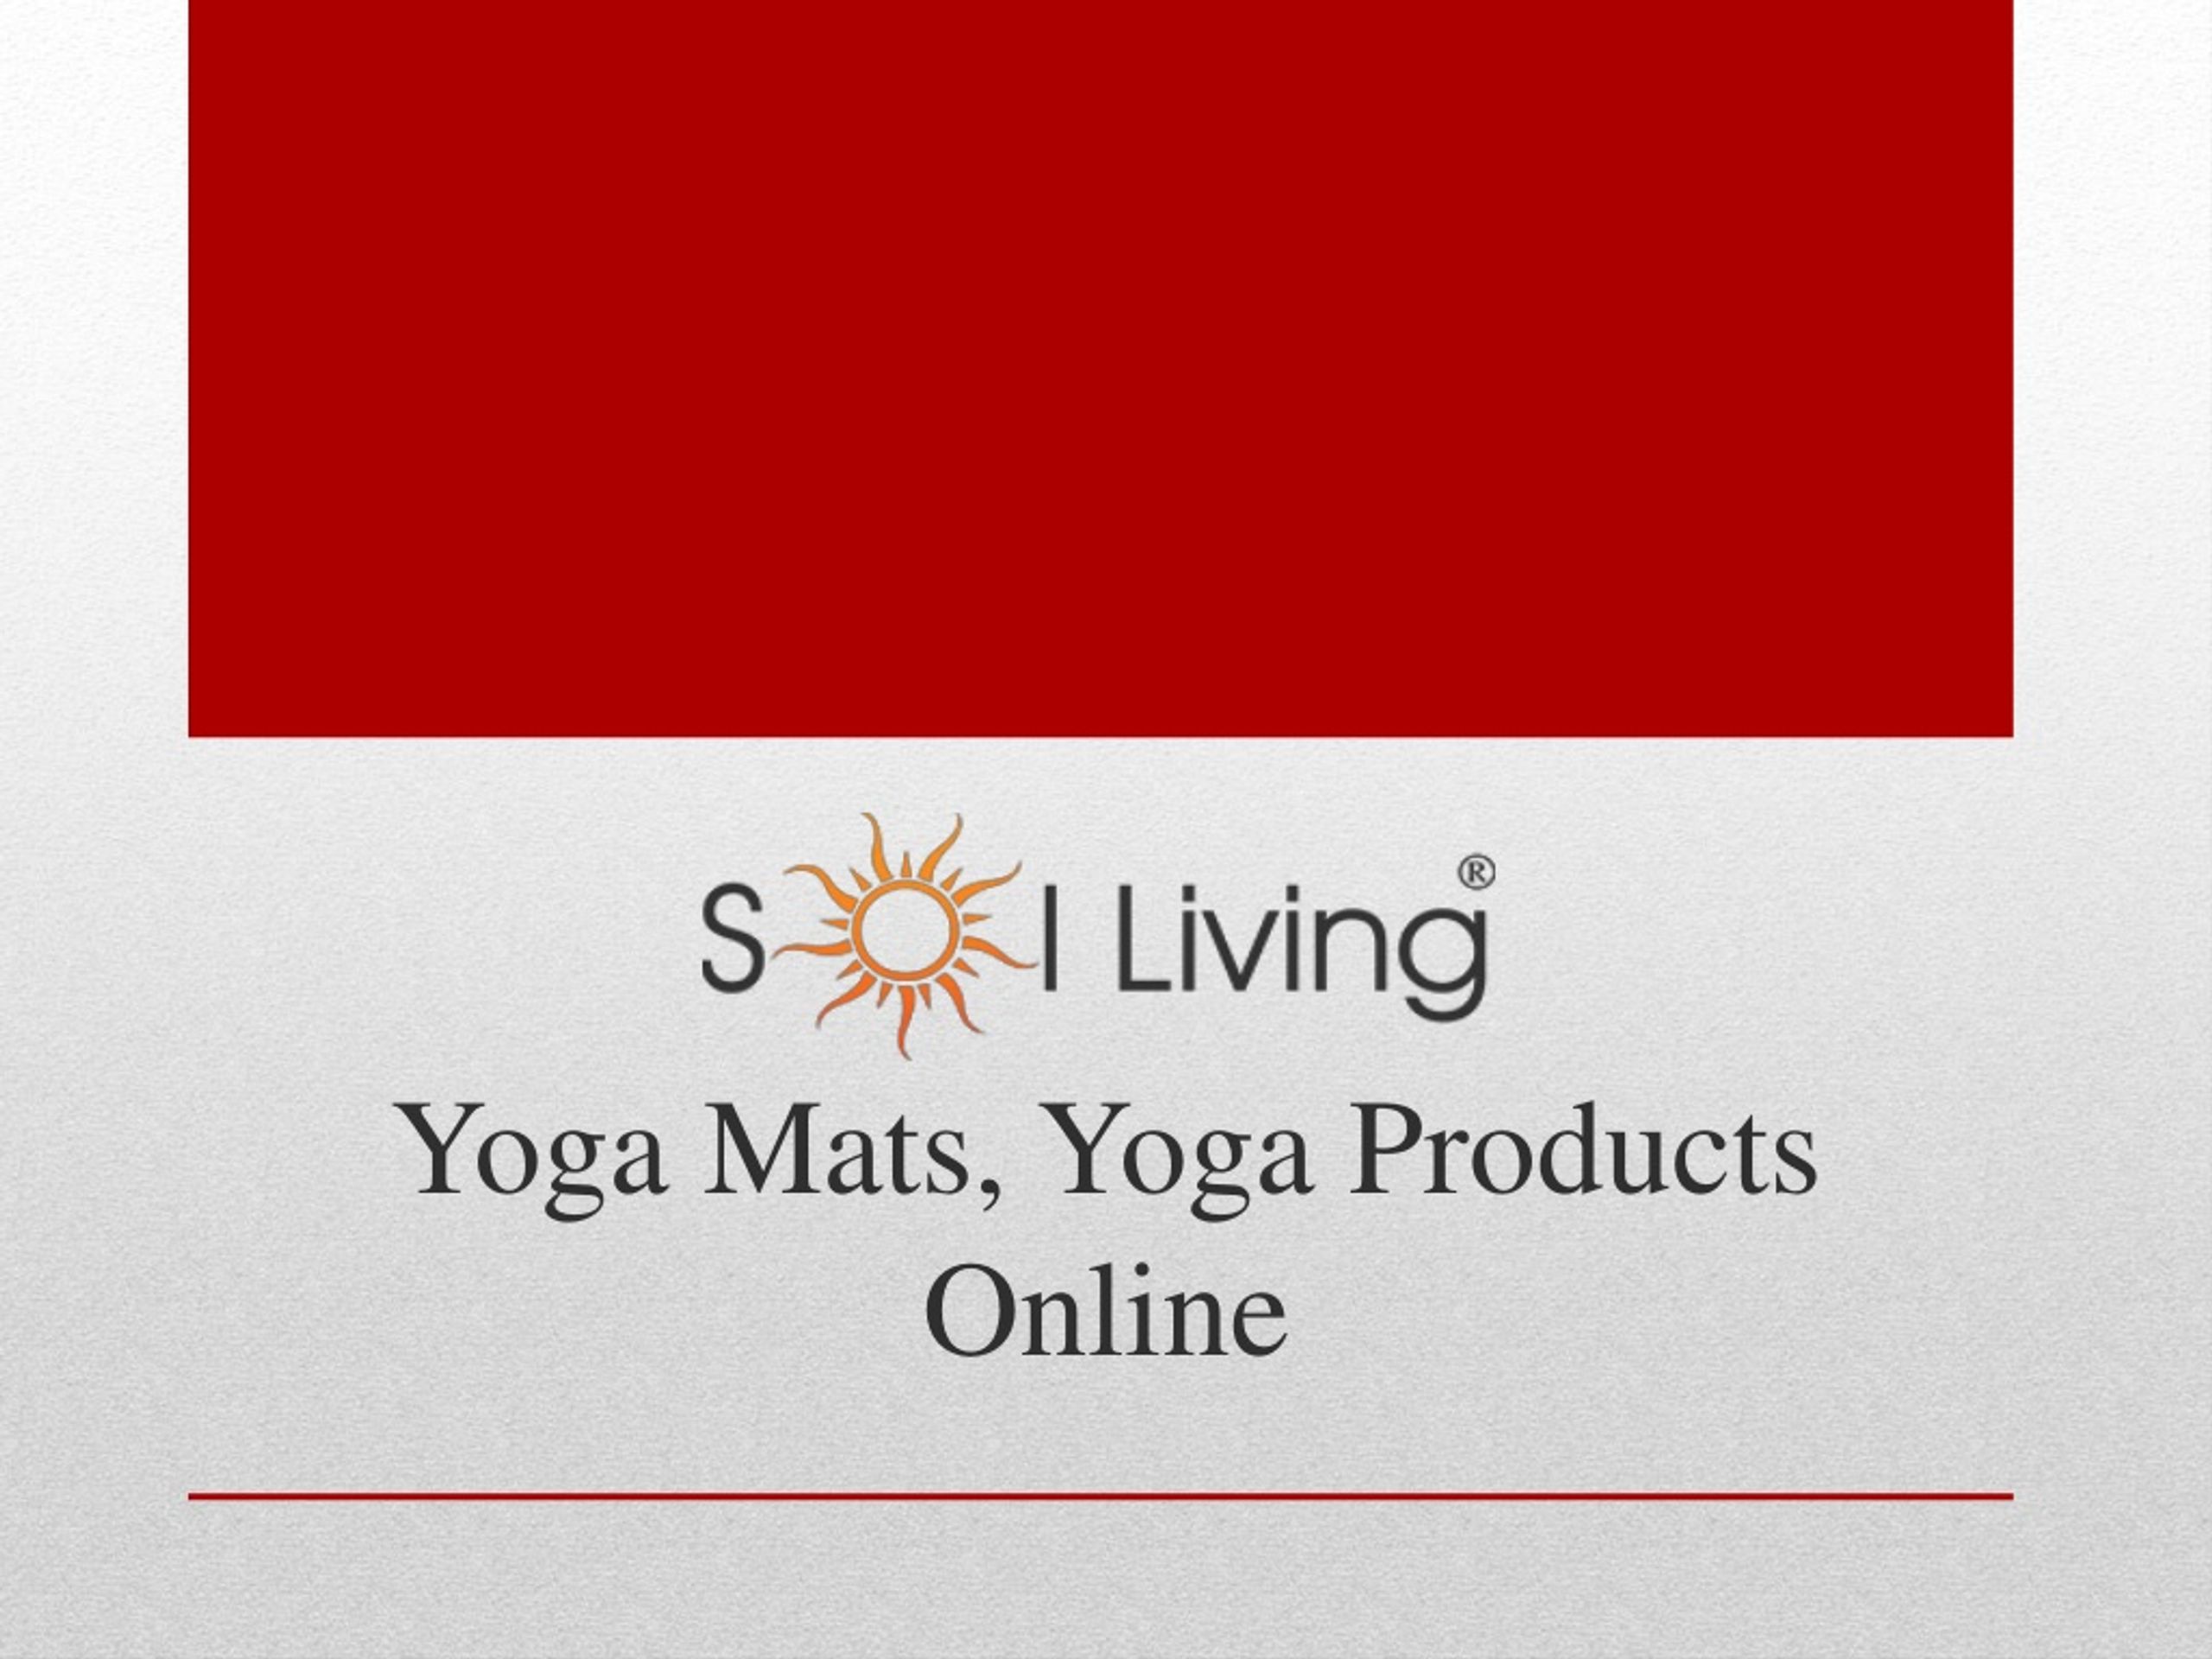 PPT - Sol Living - High Quality Yoga Mat, Yoga Products Online